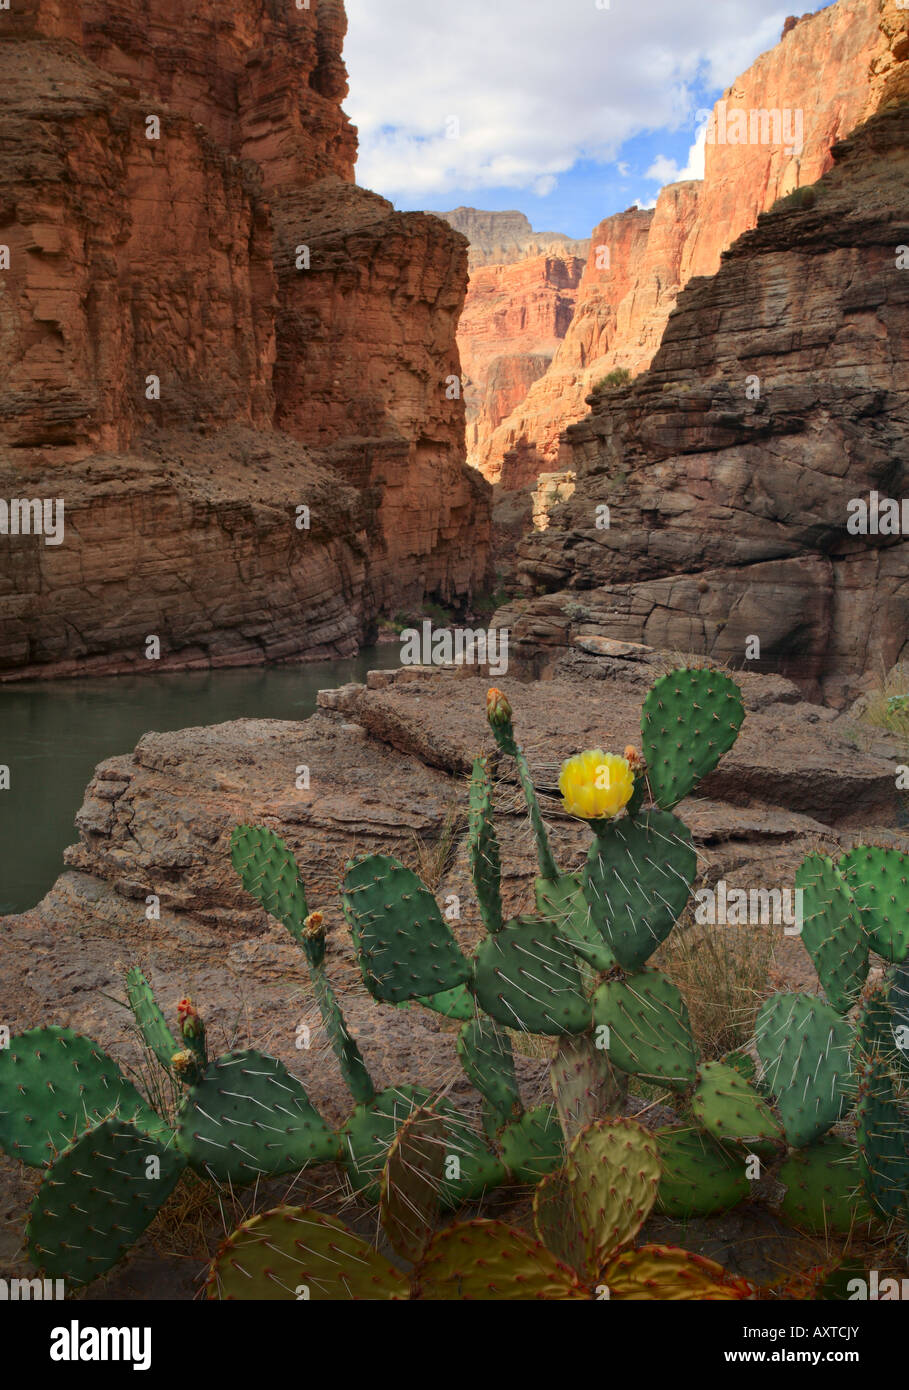 Prickly Pear cactus at the mouth of Havasu Canyon in Grand Canyon National Park Stock Photo